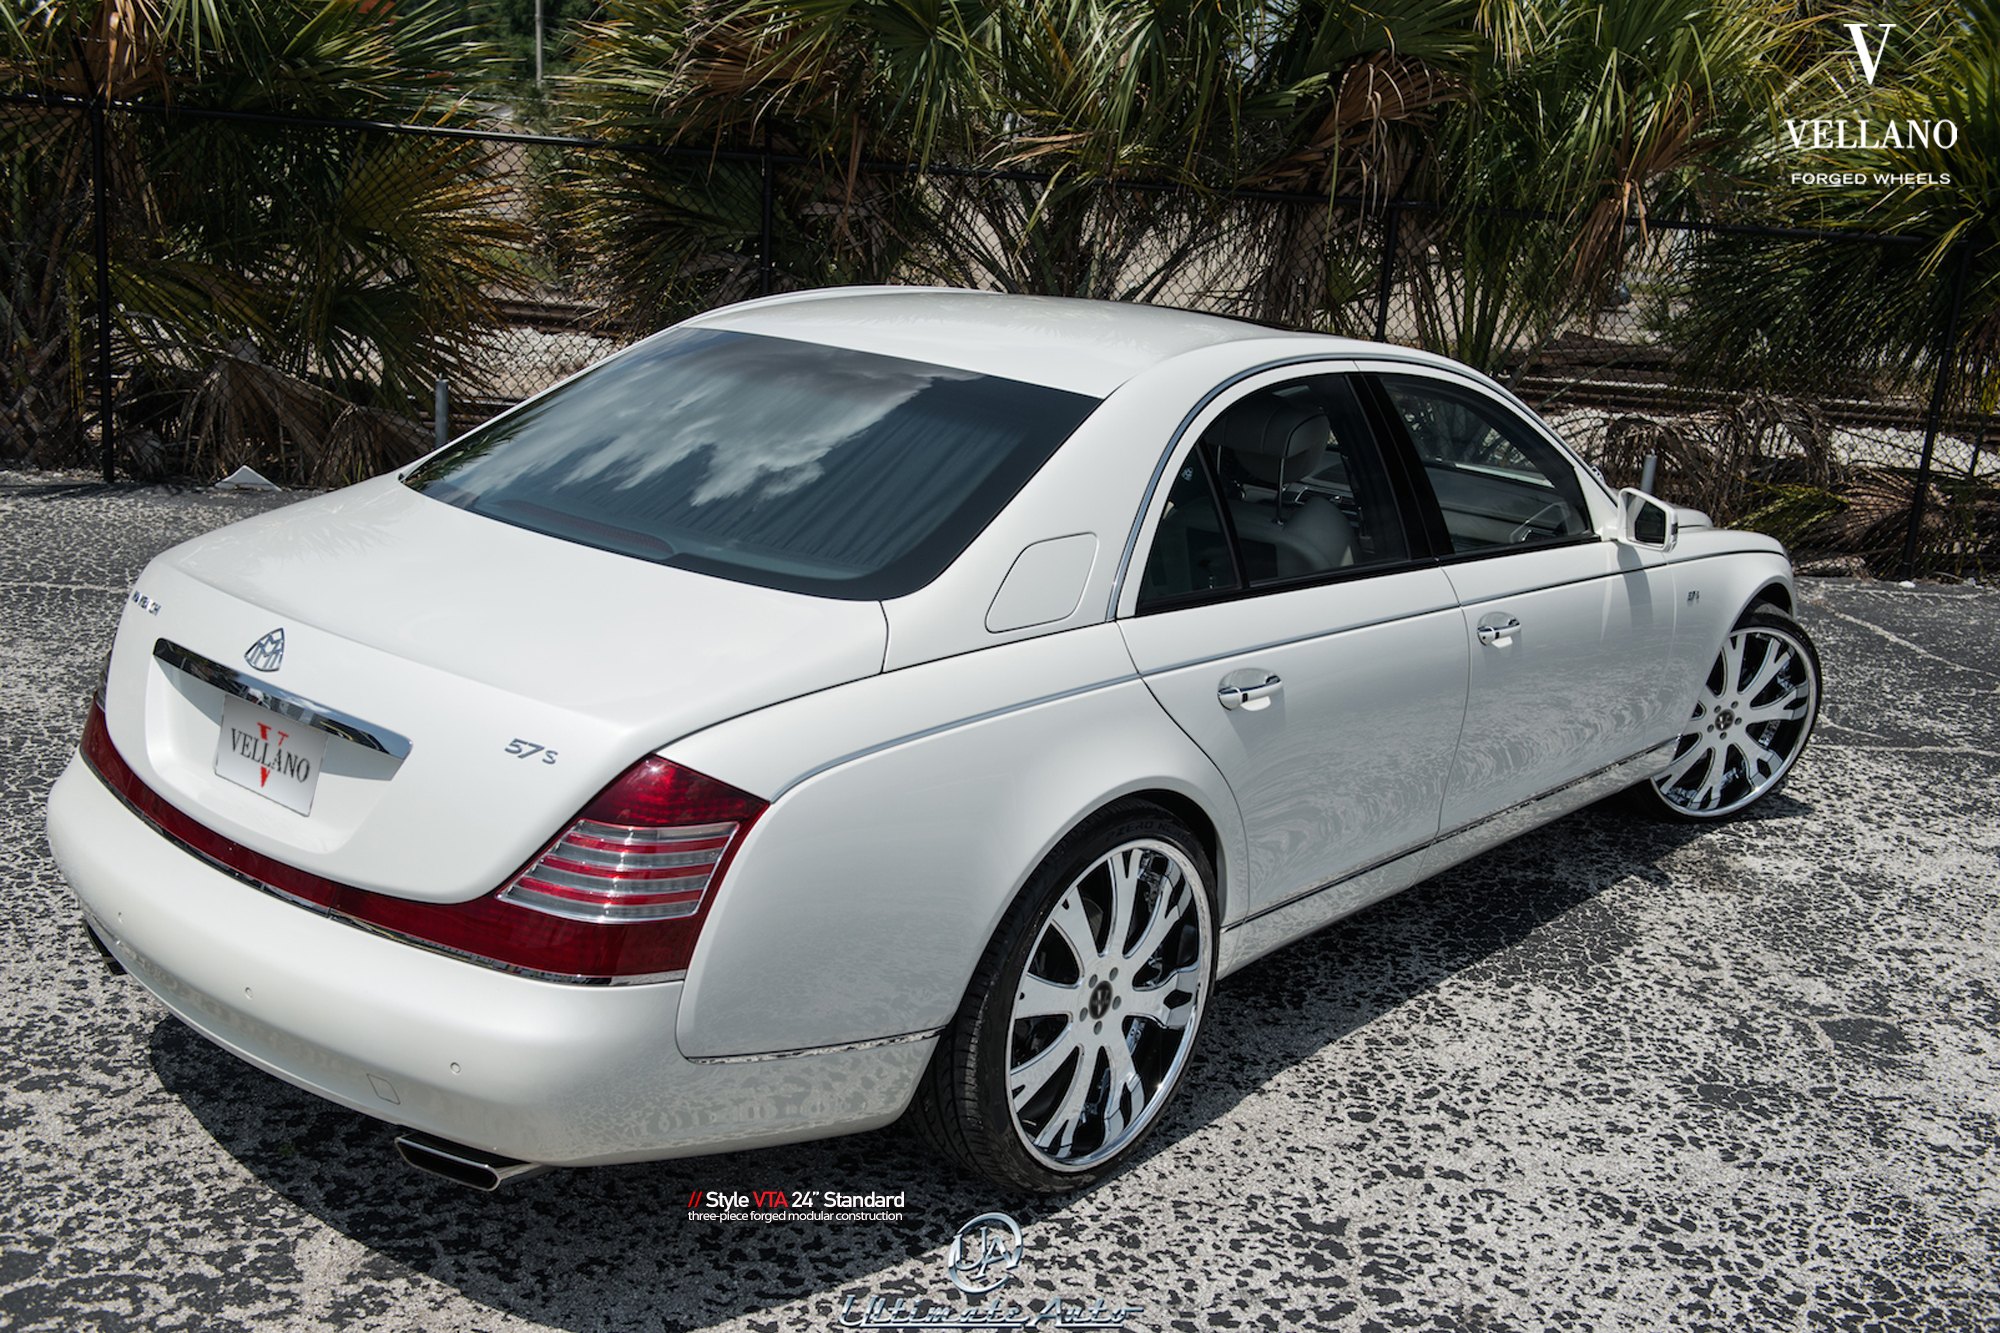 Red LED Taillights on White Maybach 57S - Photo by Vellano